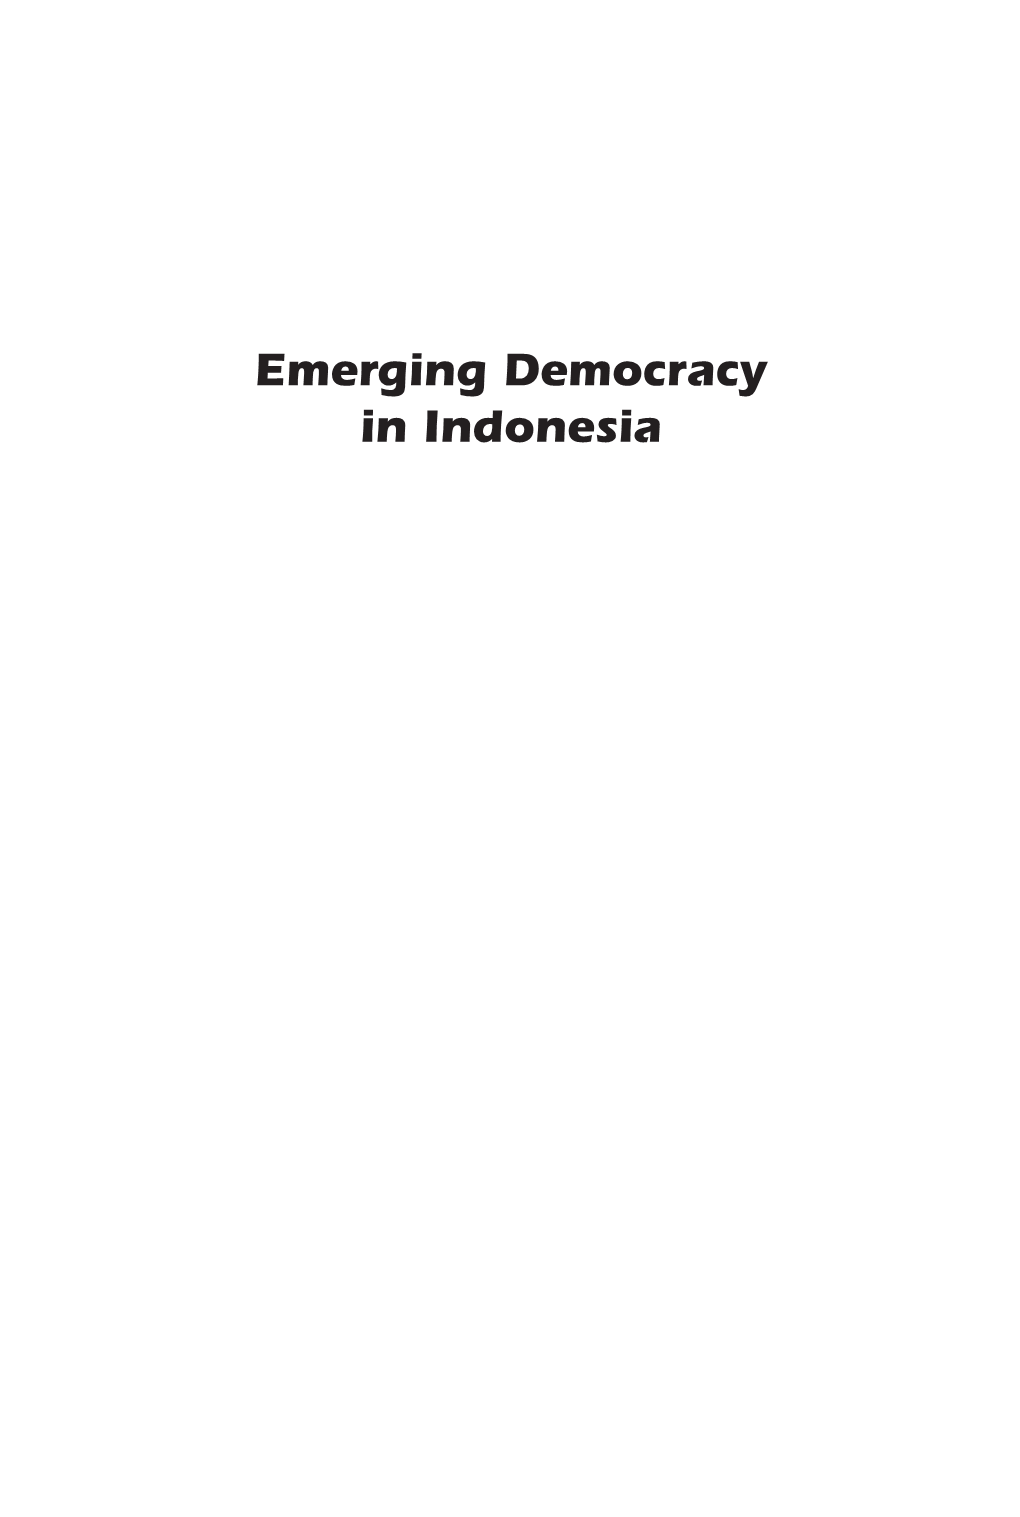 00 Emerging Democracy Prelims1 8/7/05, 11:34 AM the Institute of Southeast Asian Studies (ISEAS) Was Established As an Autonomous Organization in 1968